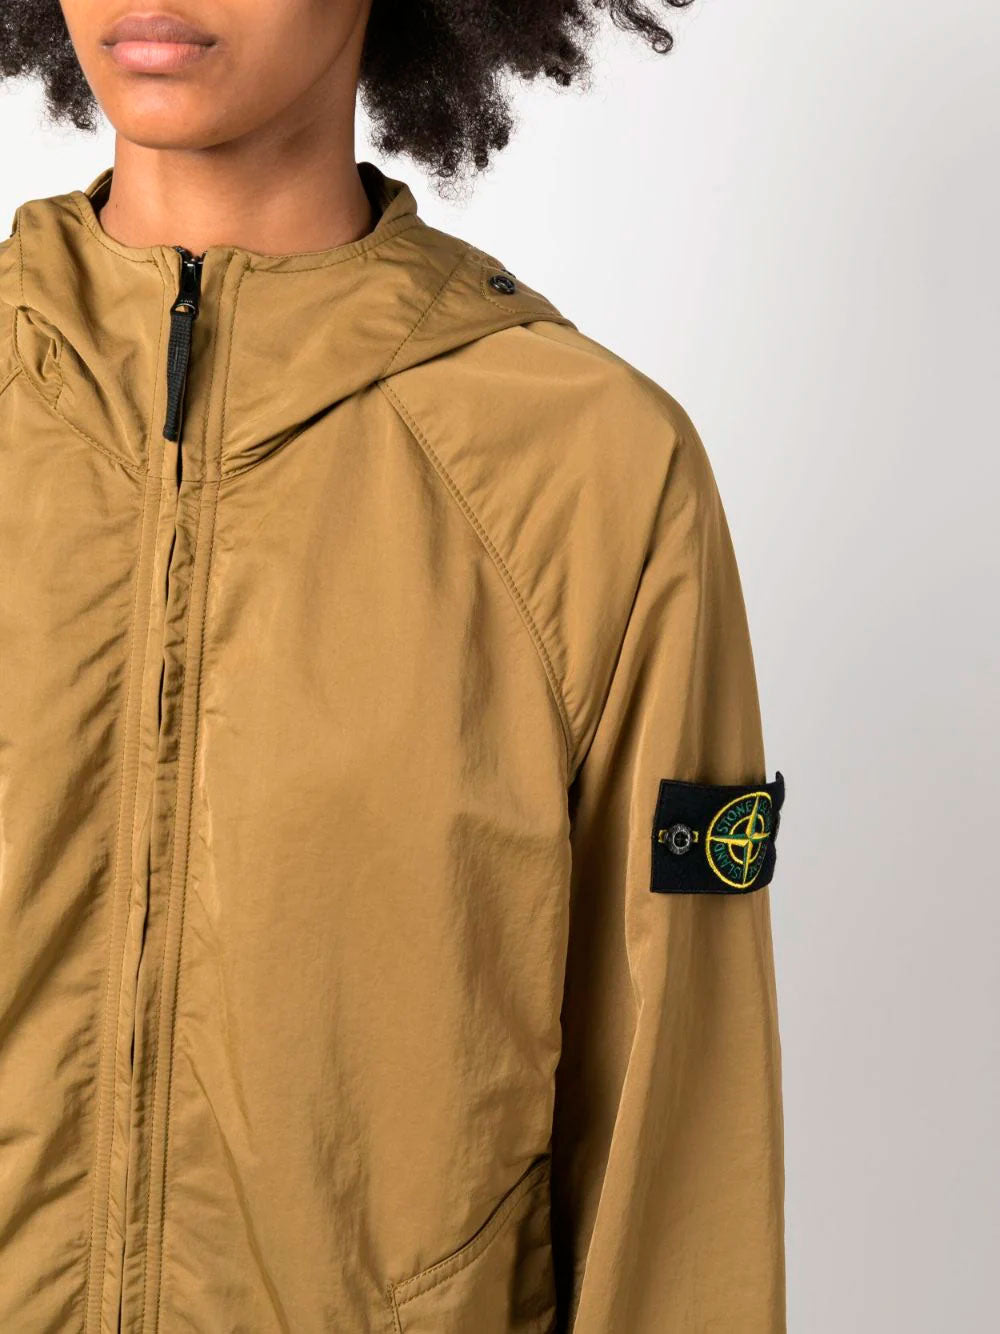 Compass-patch hooded parka